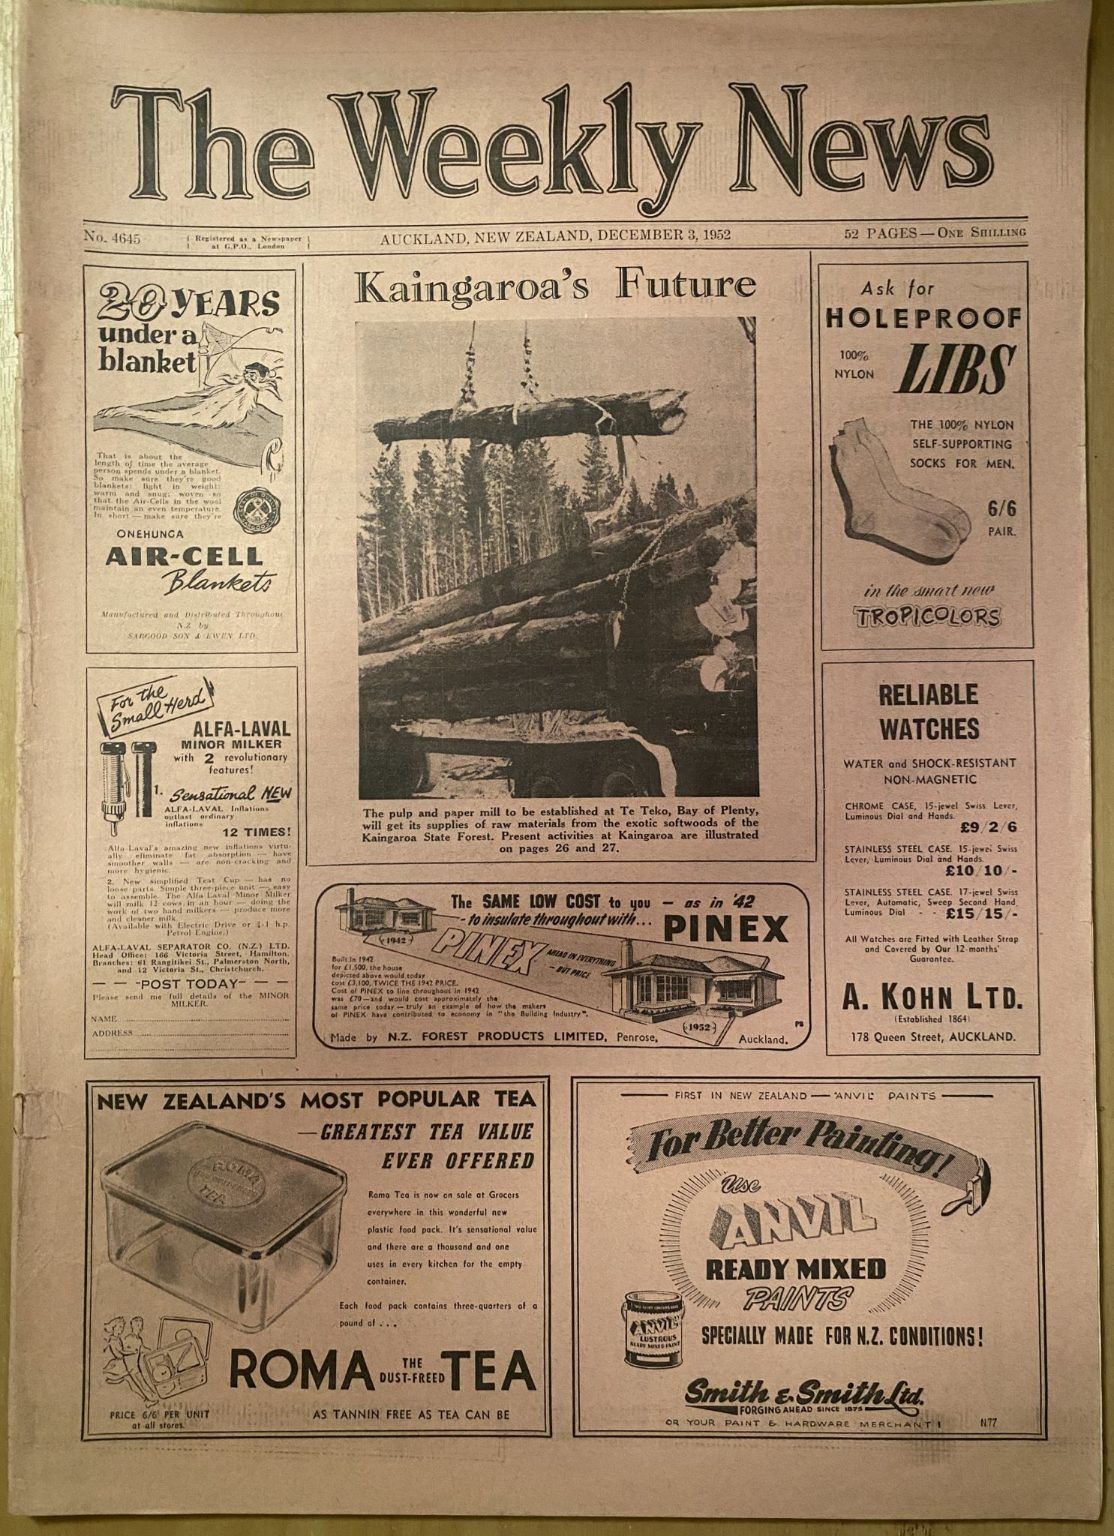 OLD NEWSPAPER: The Weekly News - No. 4645, 3 December 1952